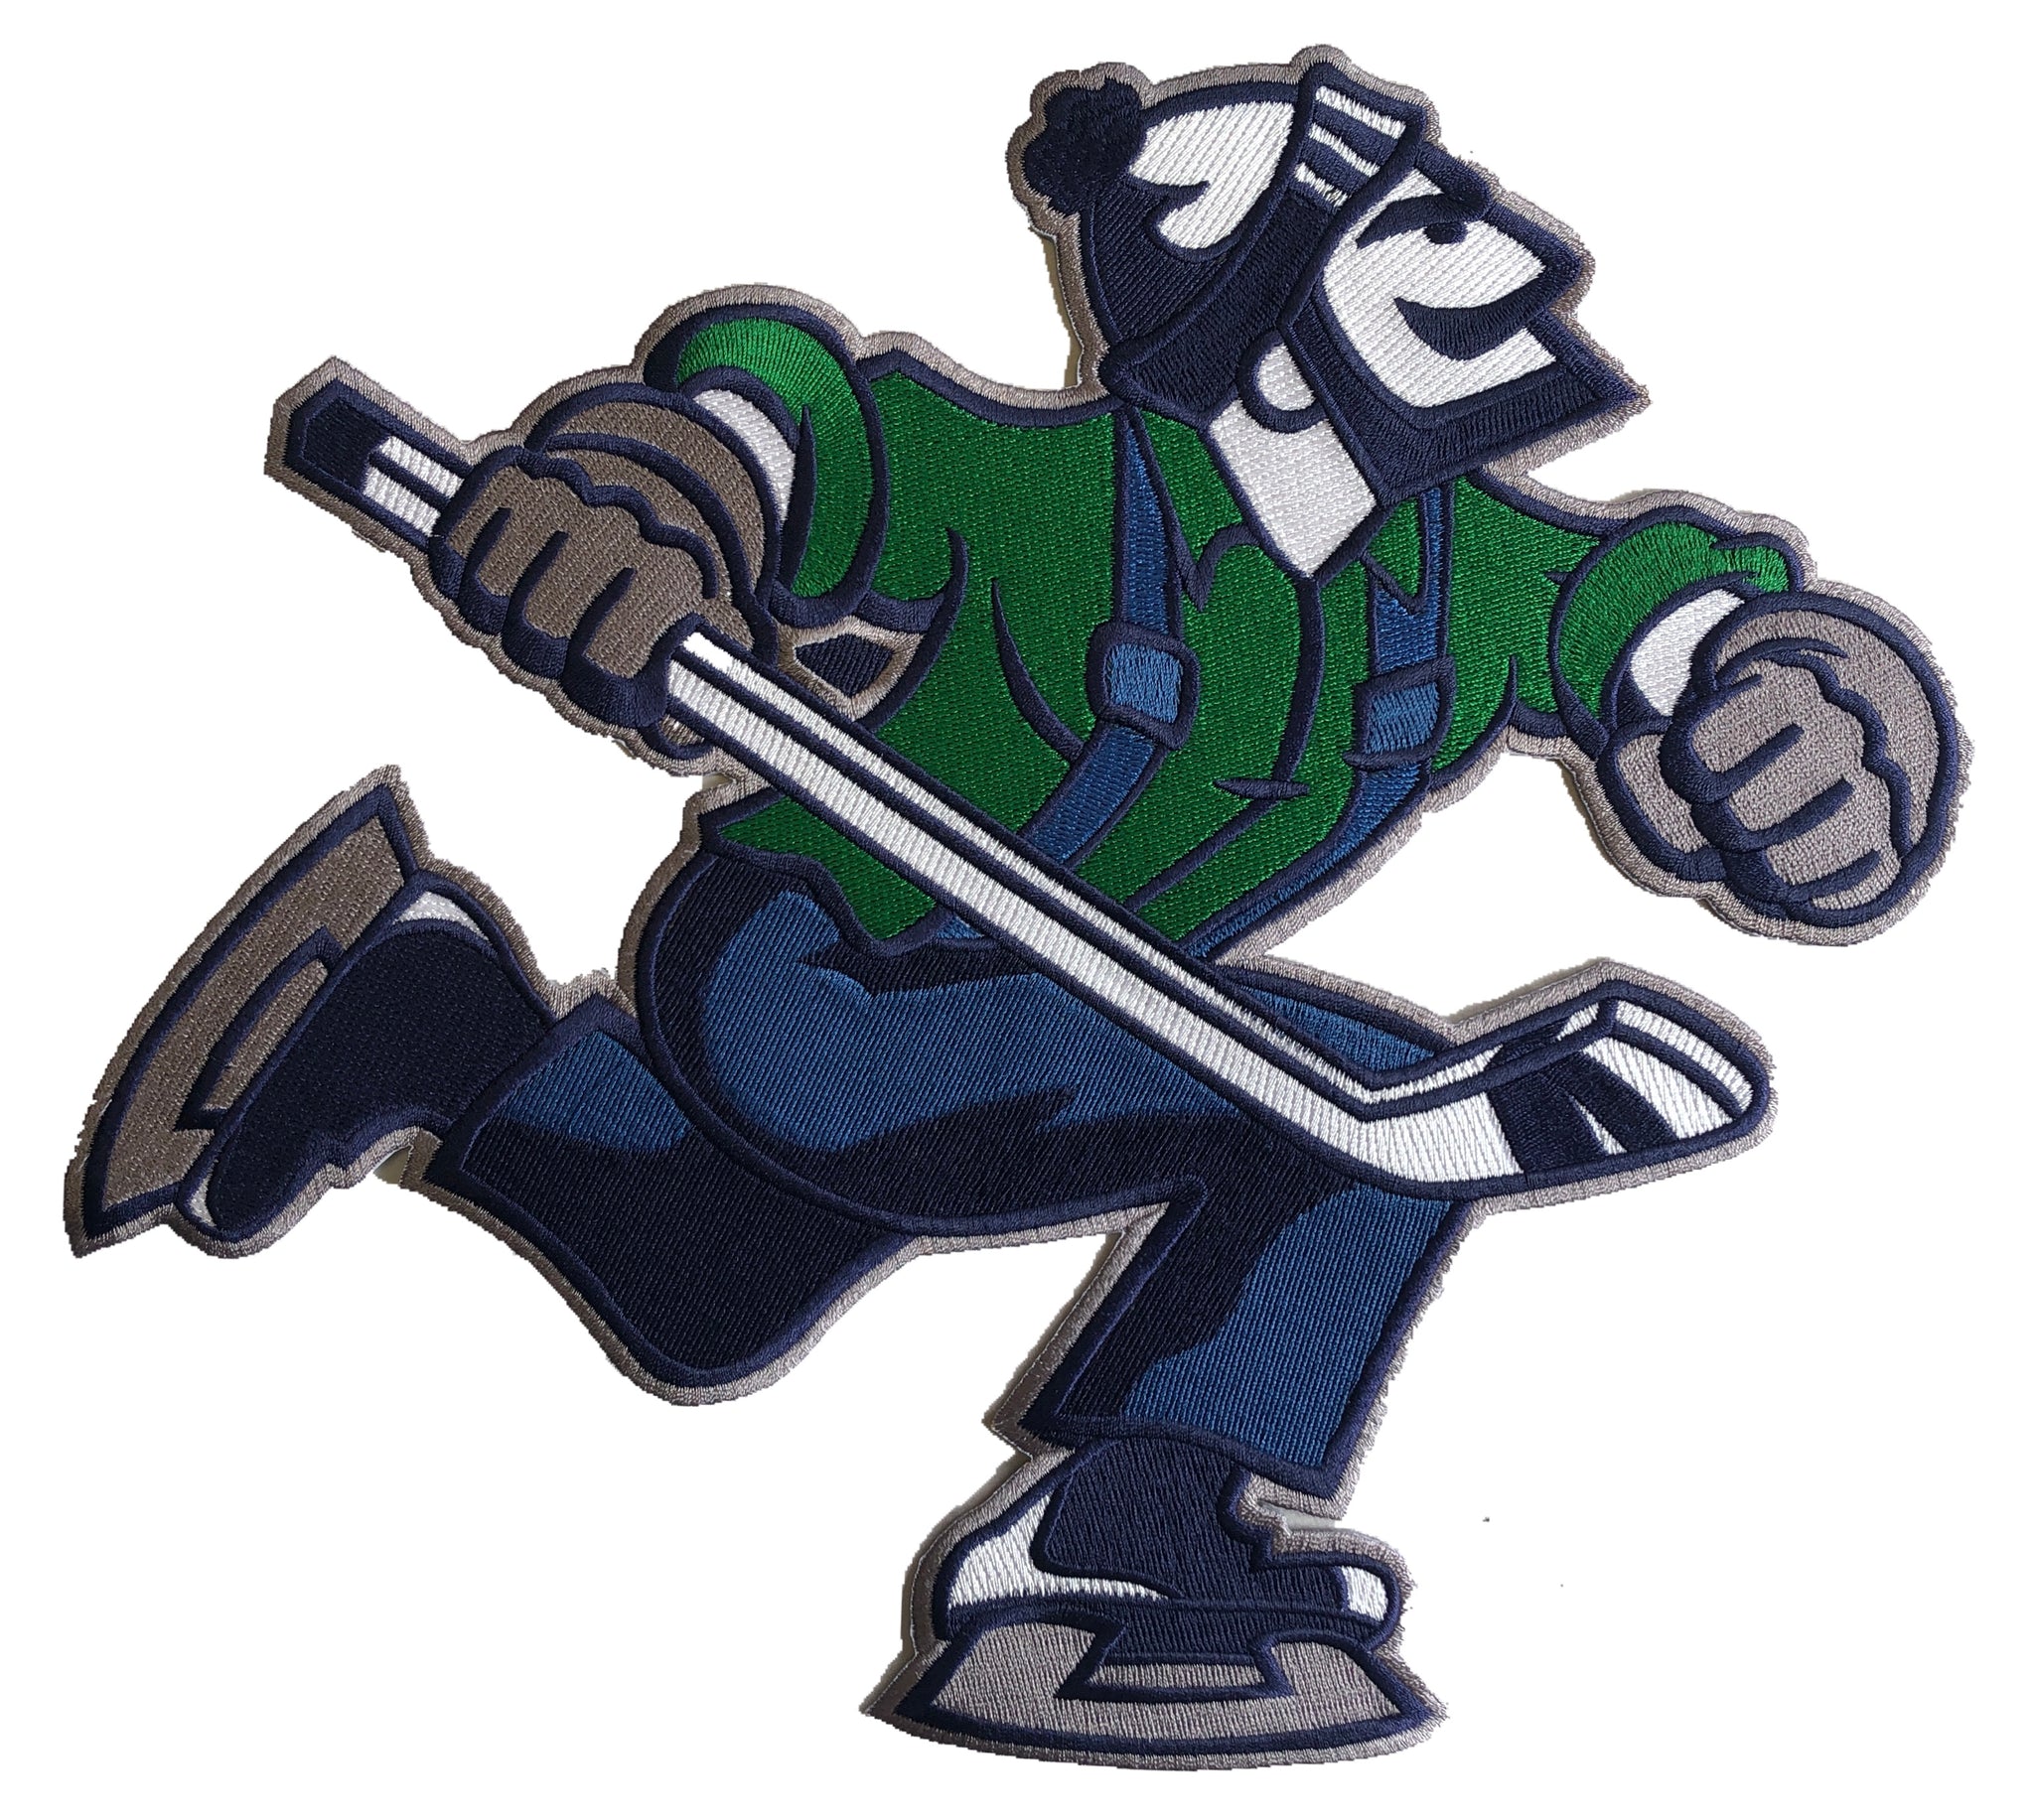 Vancouver Canucks Heritage Concepts team logo Hockey Jersey • Kybershop